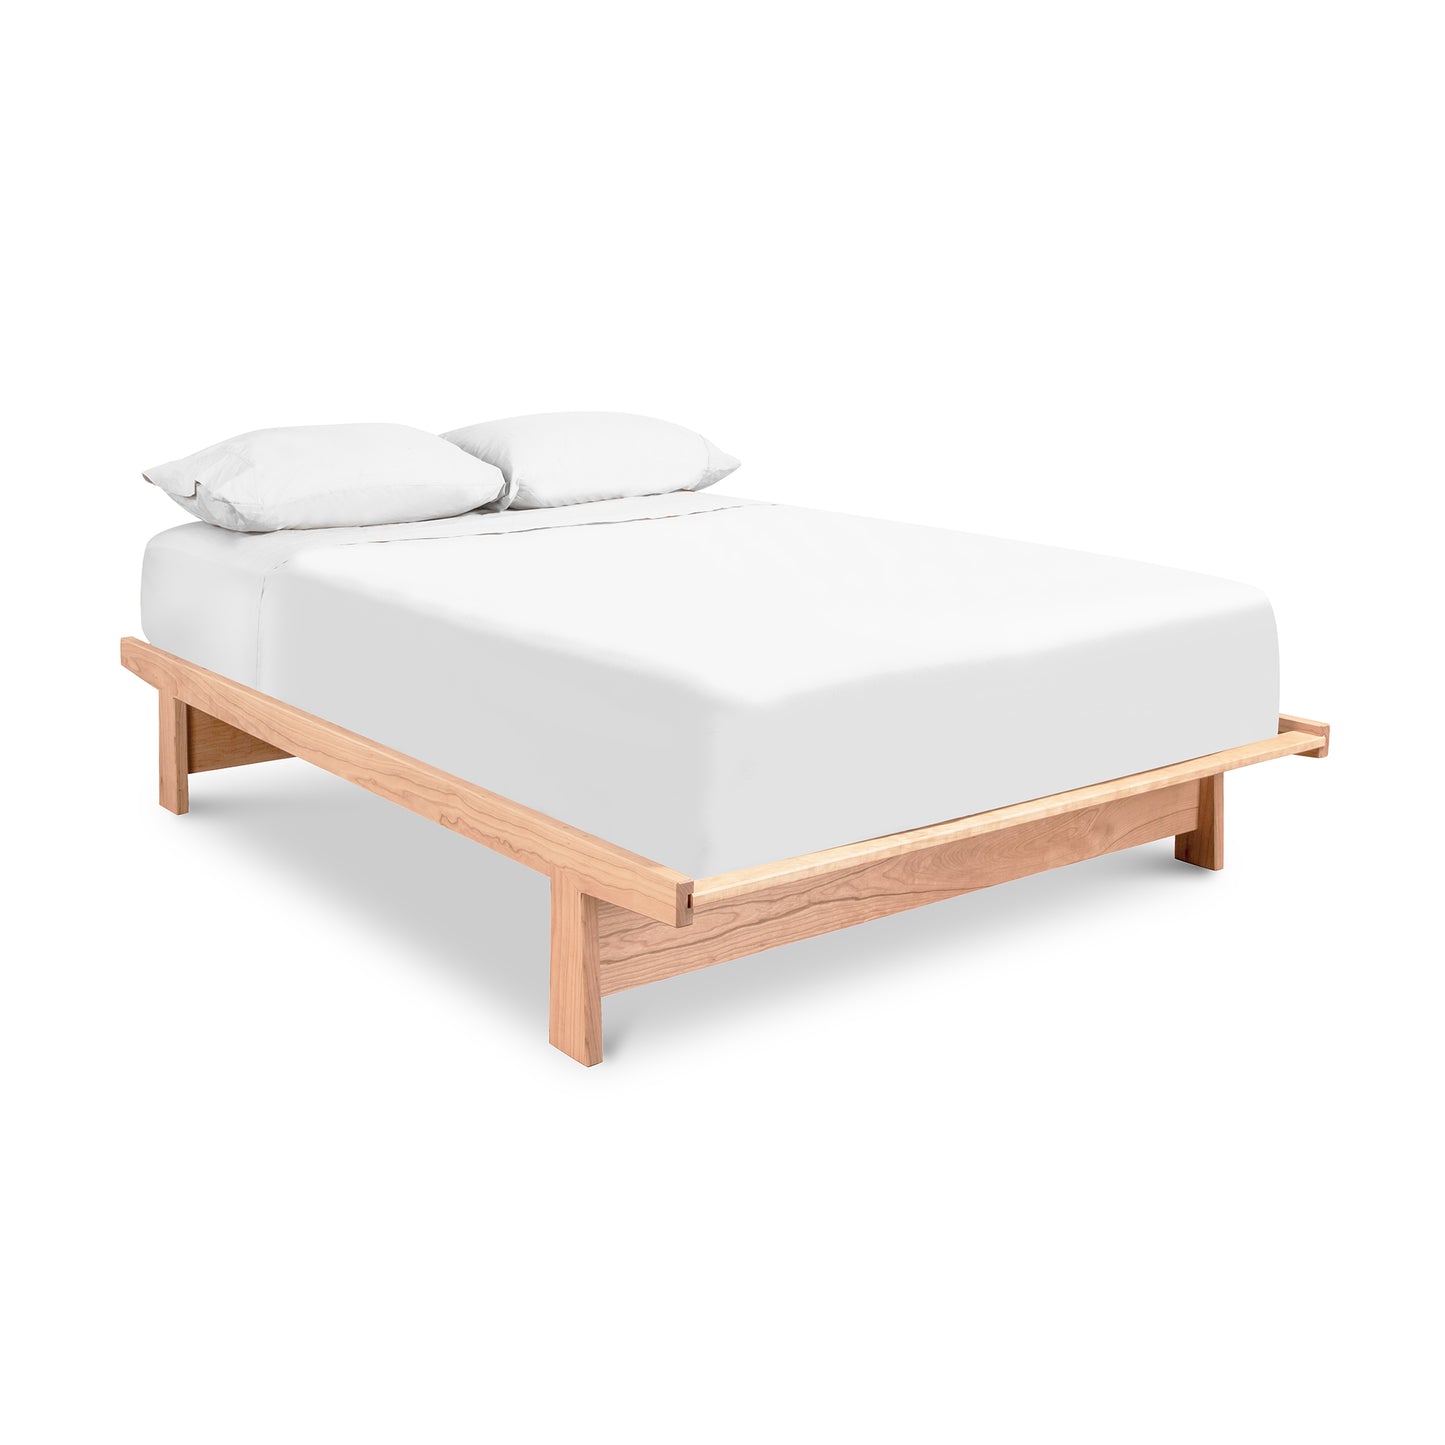 A simple Maple Corner Woodworks Cherry Moon Dovetail Platform Bed with a white mattress and two pillows, isolated on a white background.